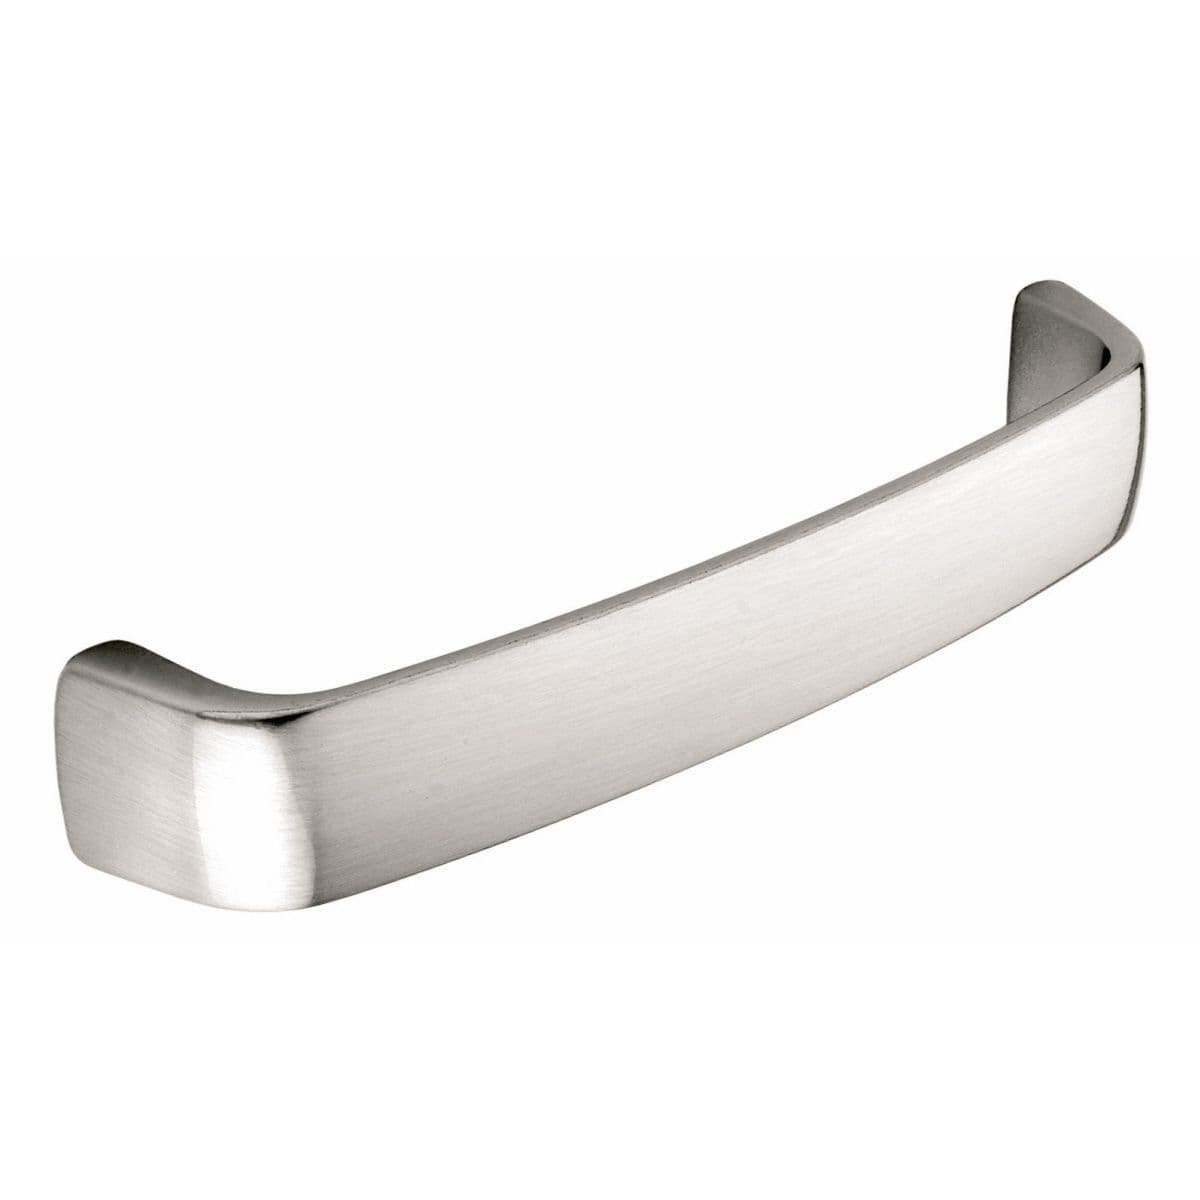 DANBY D Cupboard Handle - 2 sizes - POLISHED STAINLESS STEEL EFFECT finish (PWS H004/H005.SF)